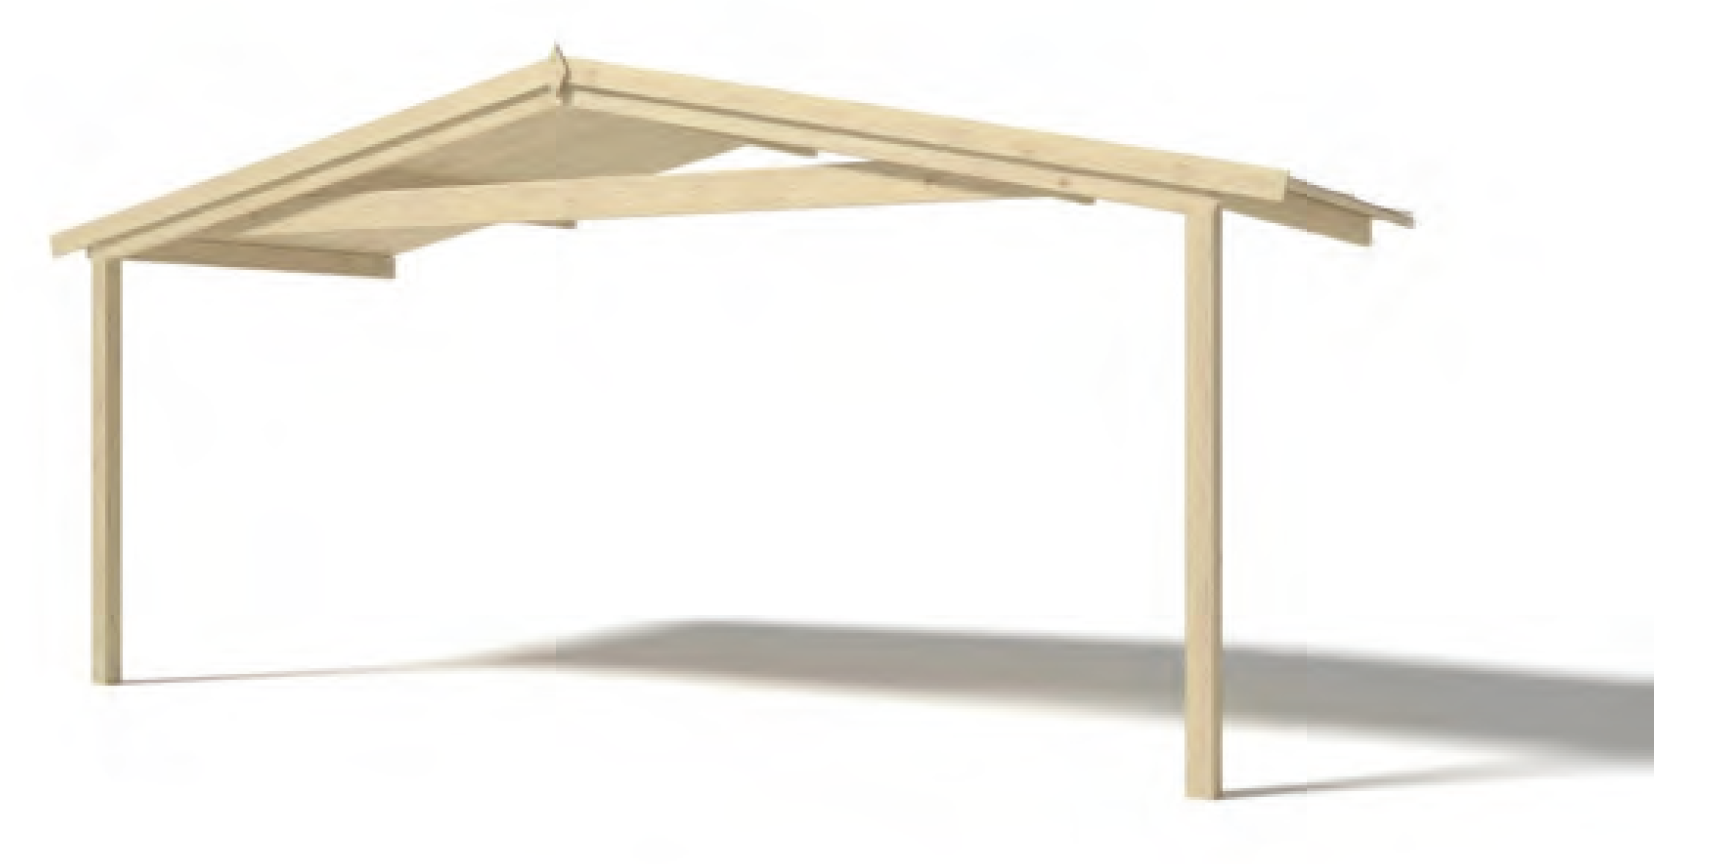 Roof and balcony Kraków for shelter in wood 500 x 200 cm